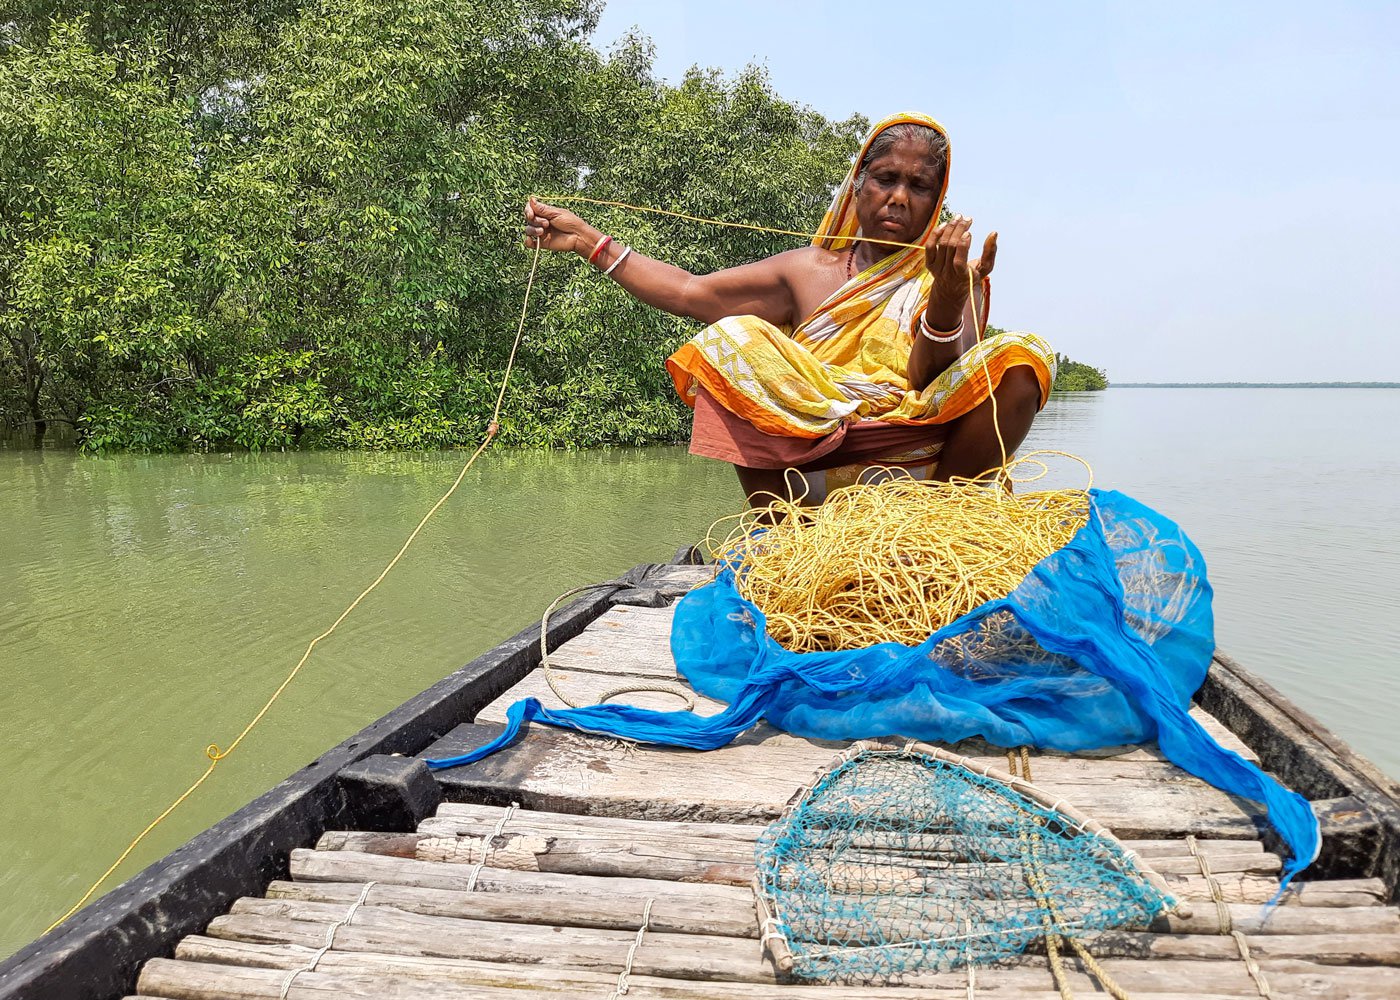 Lokhi Mondal demonstrating how to unfurl fishing nets to catch crabs